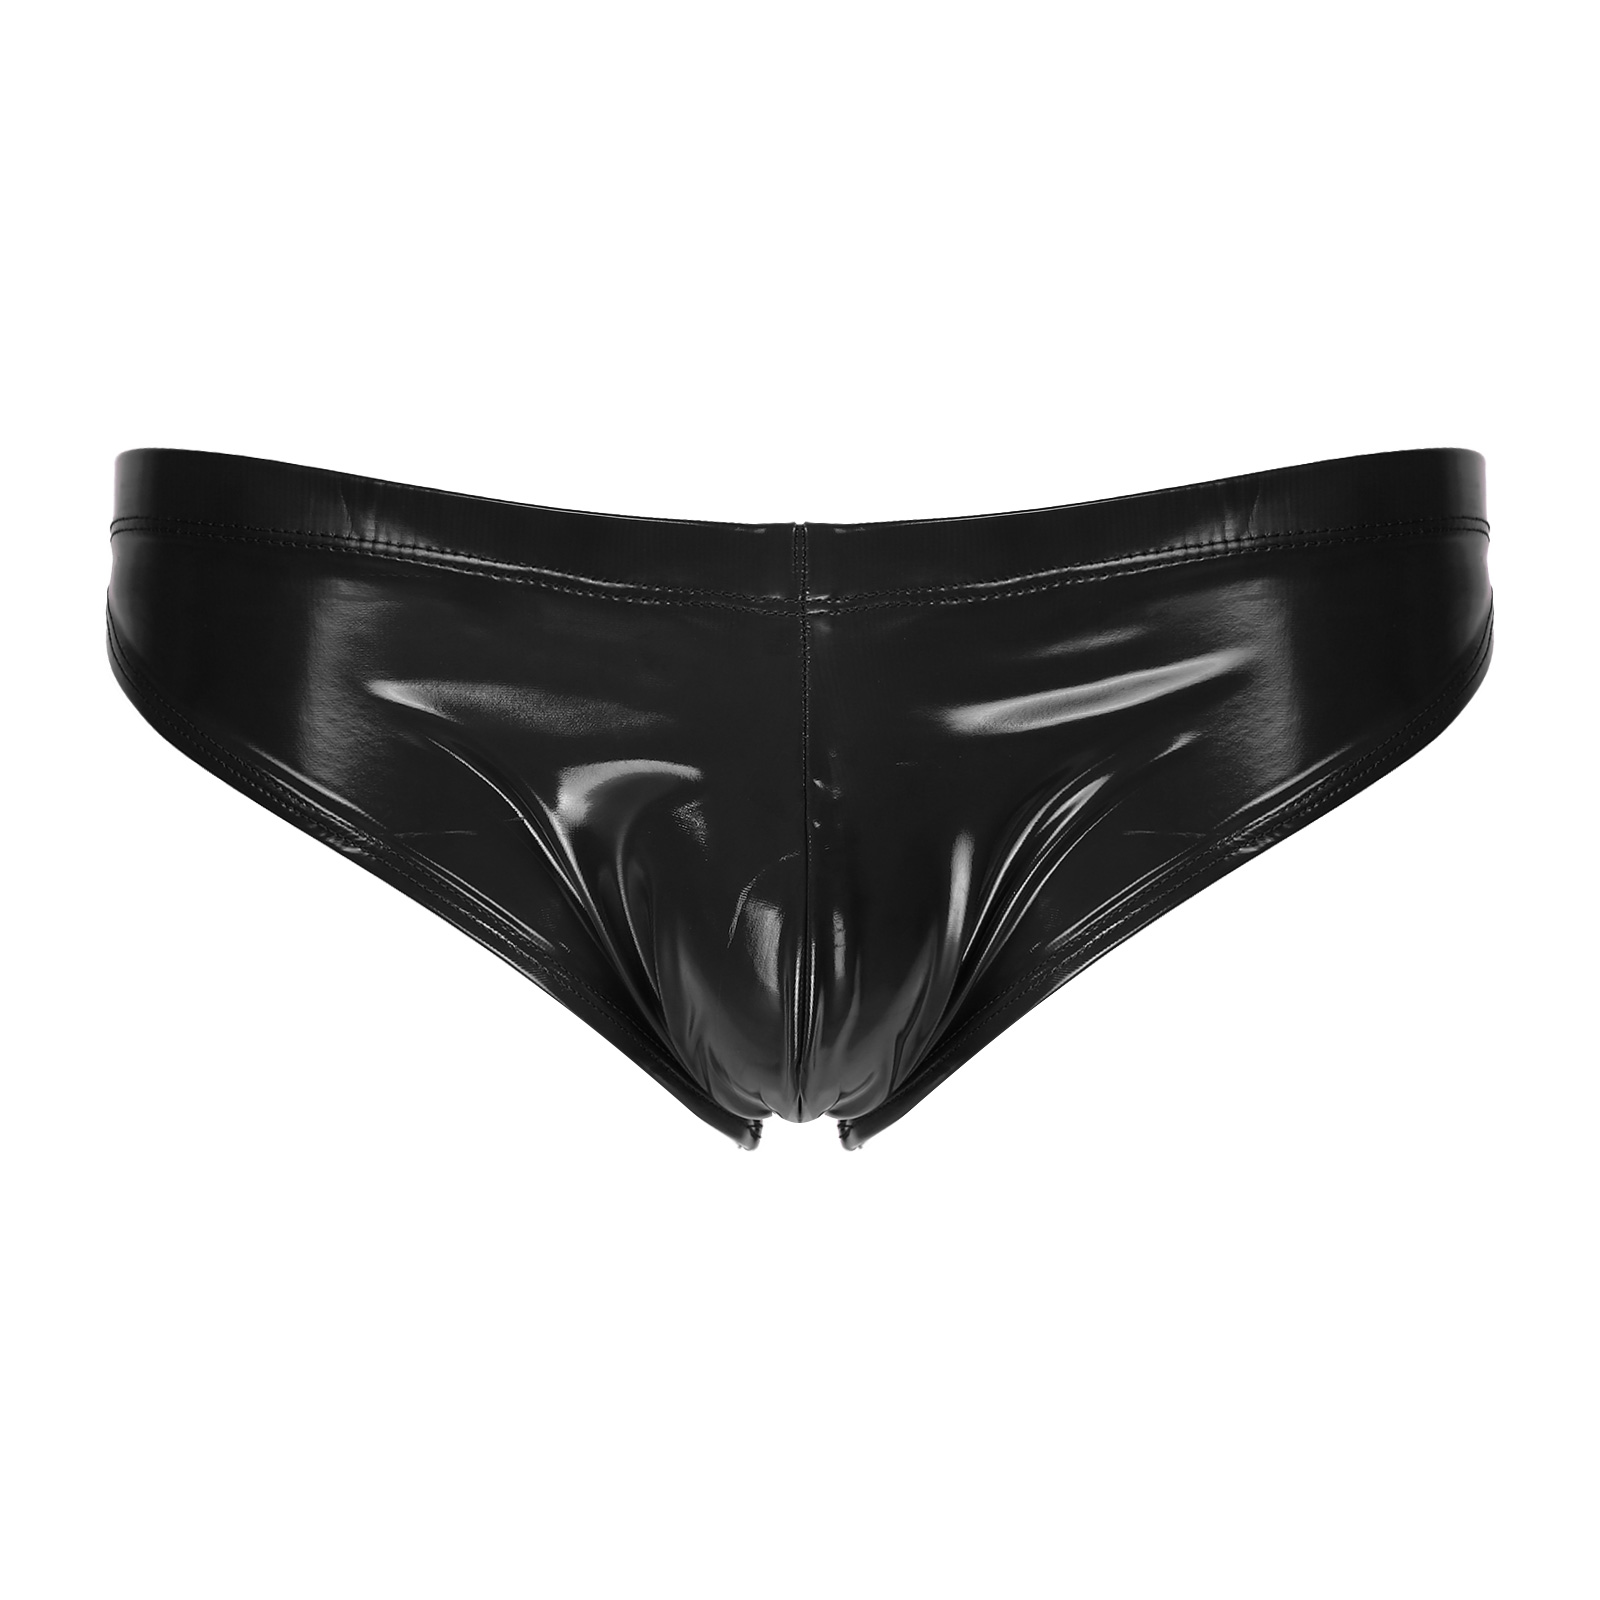 

Mens Elastic Waistband Bulge Pouch Underwear Wet Look Low Rise Underpants Latex Patent Leather Briefs Glossy Lingerie Panties